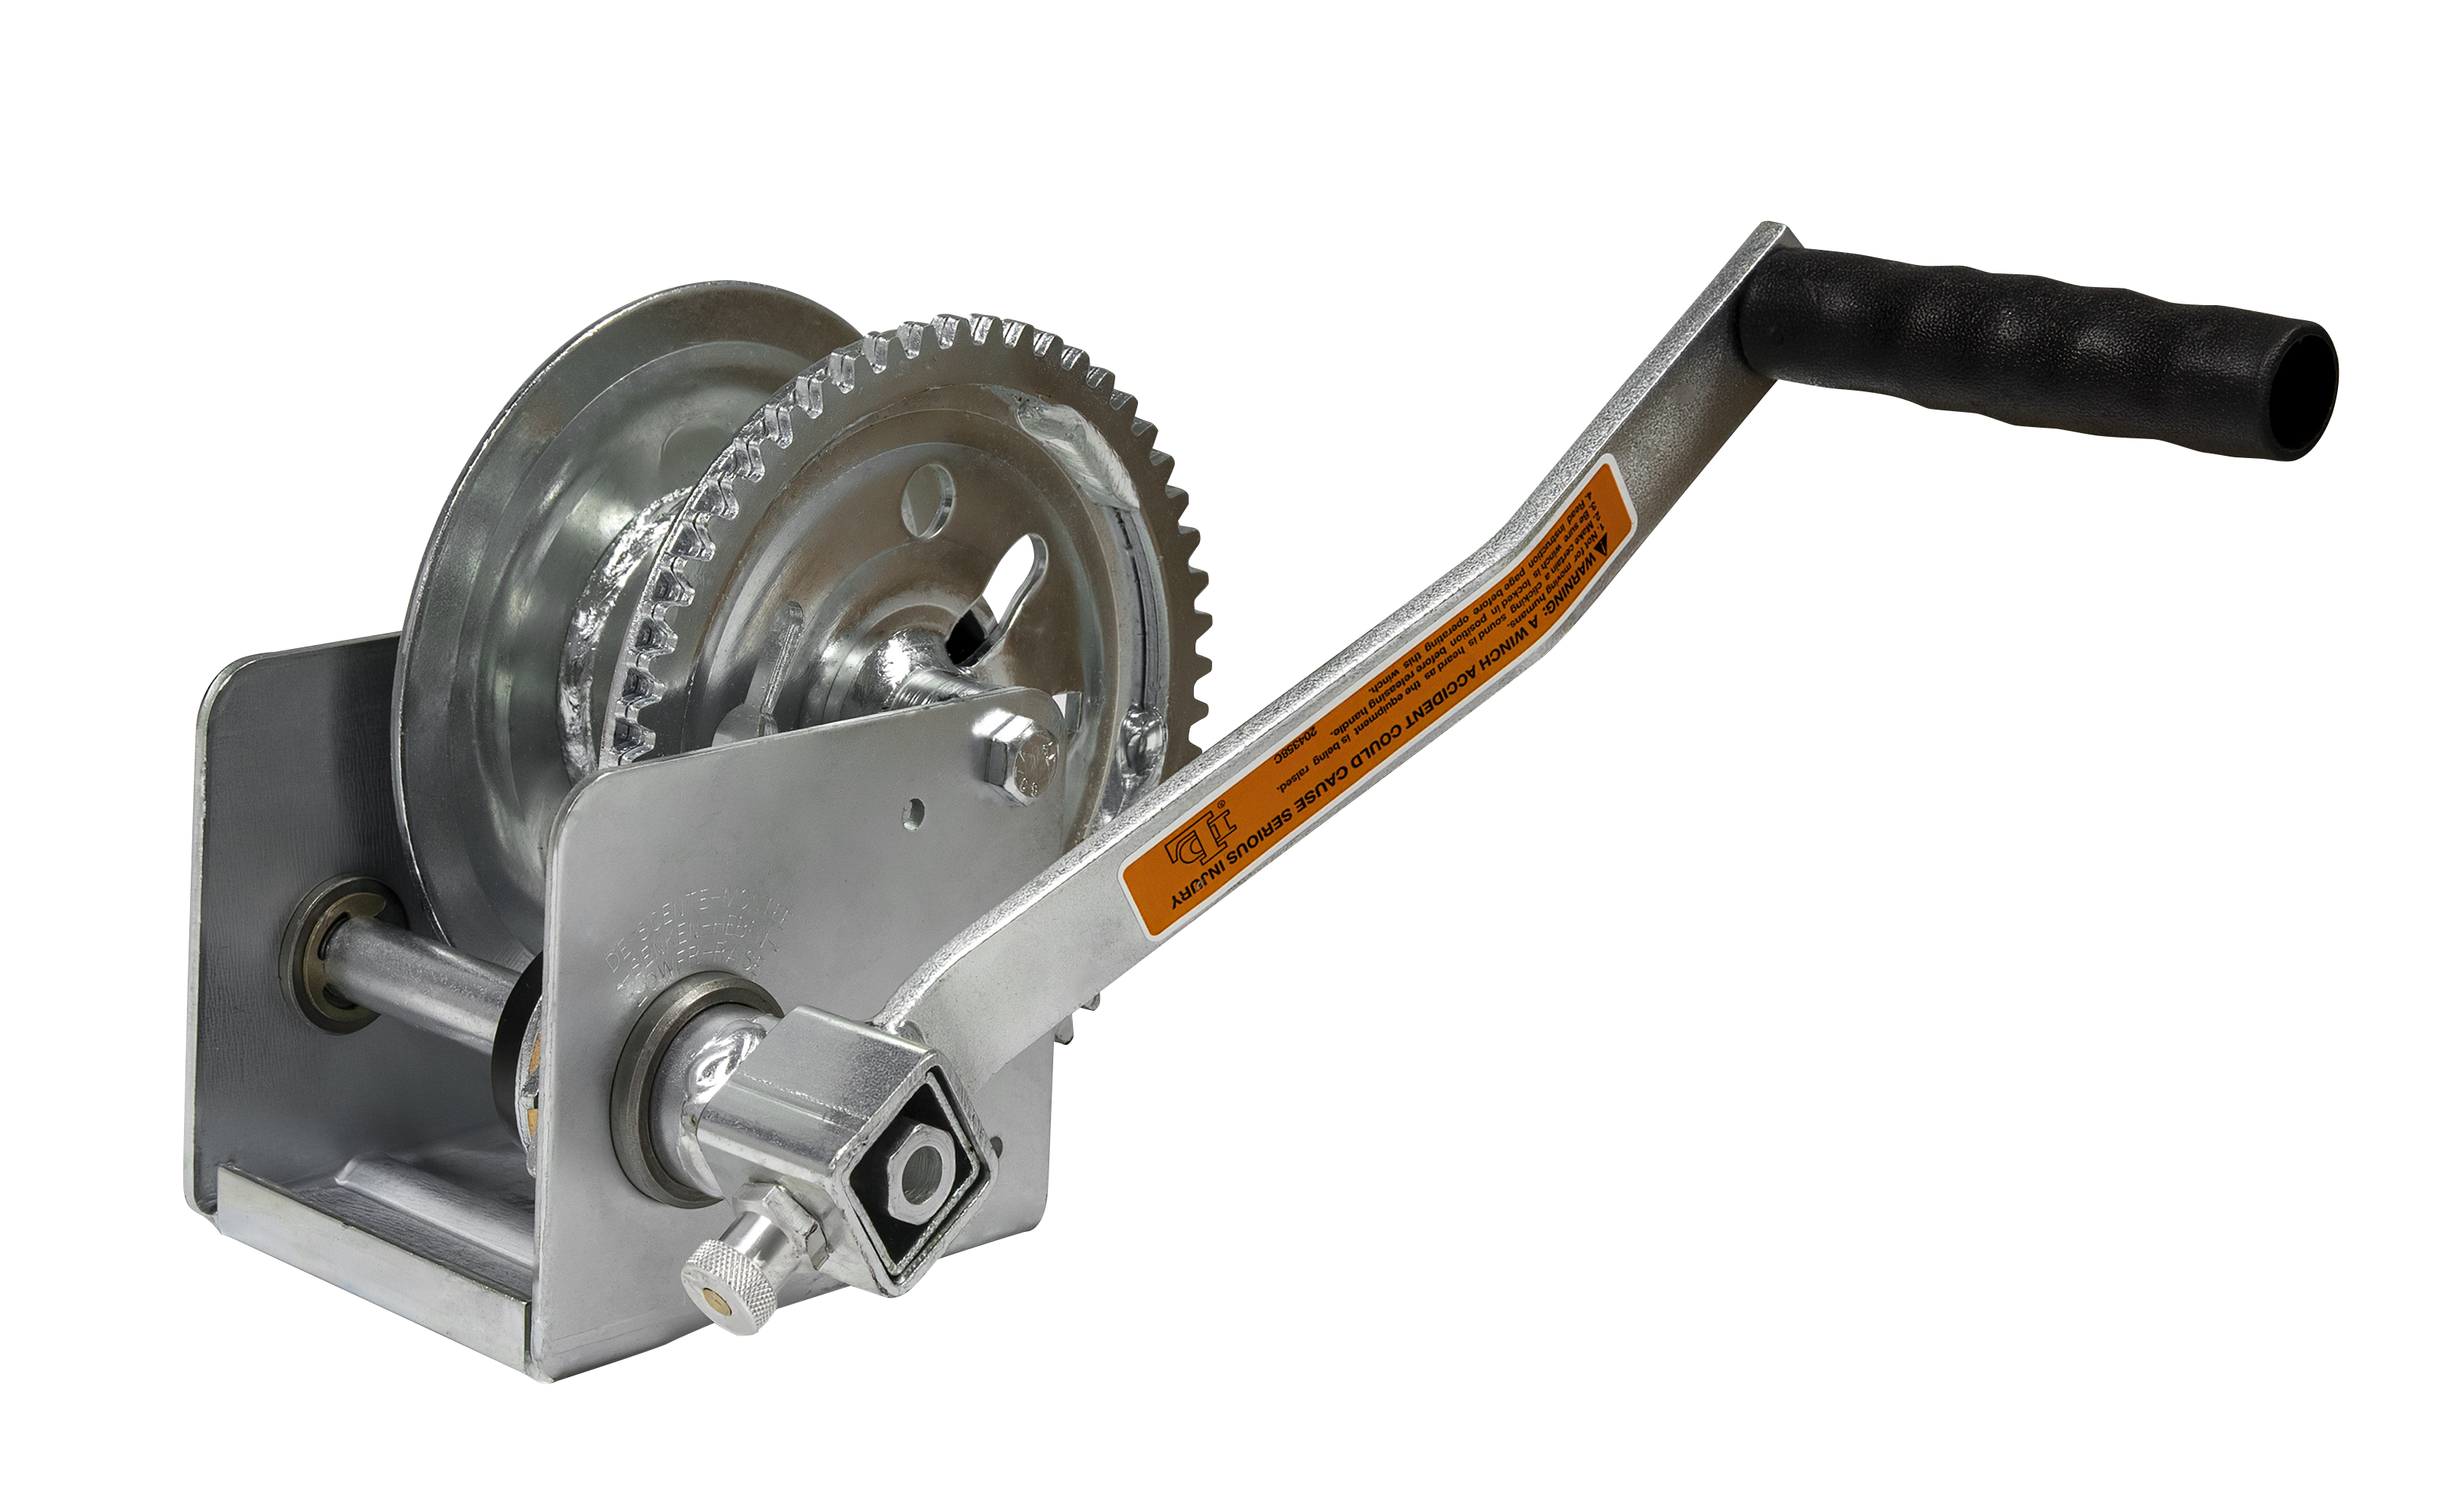 OZ Lifting Carbon Steel Hand Winch